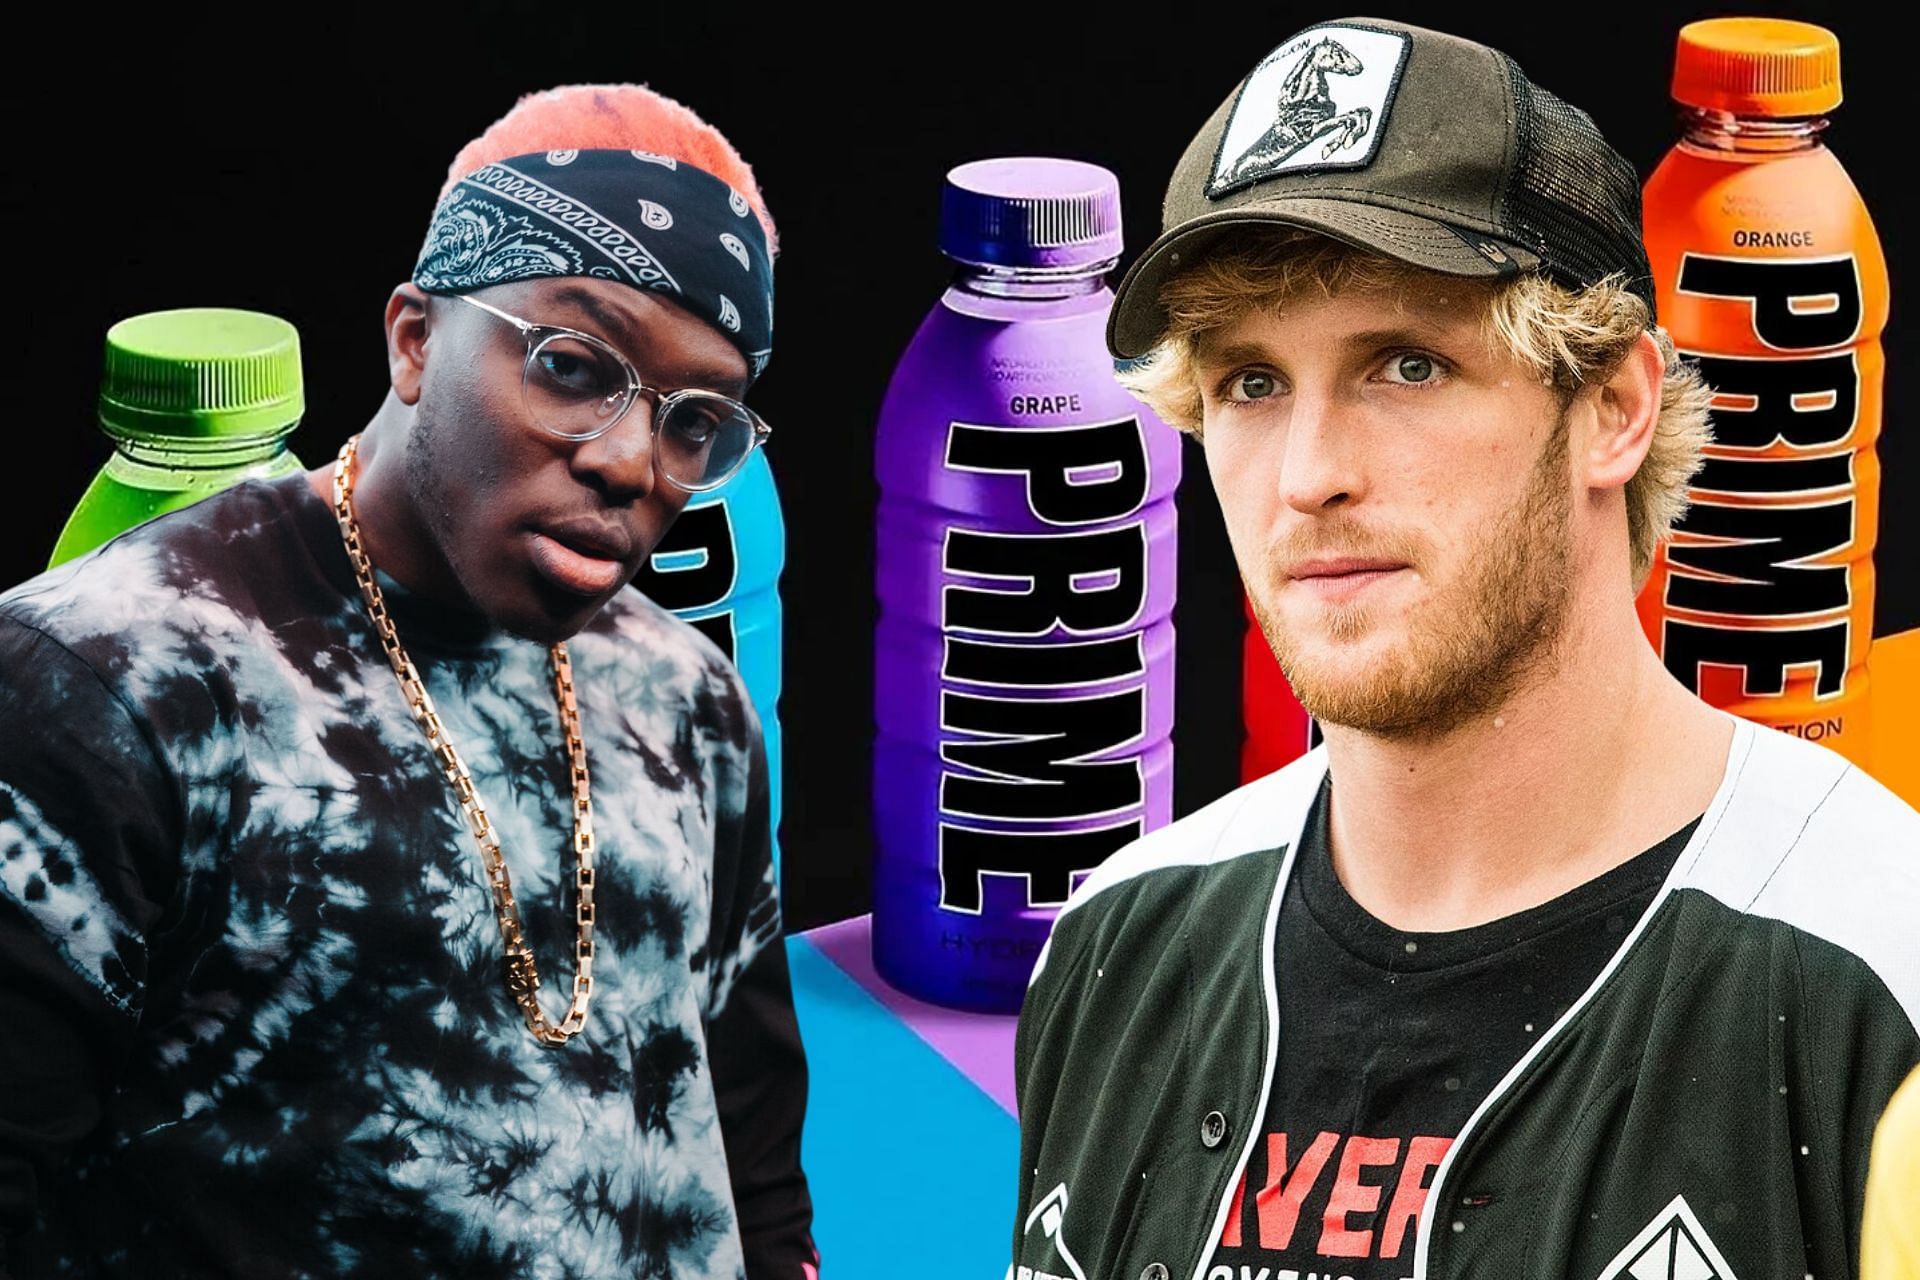 “Prime squad card” - KSI teases a possible event with Logan Paul in January